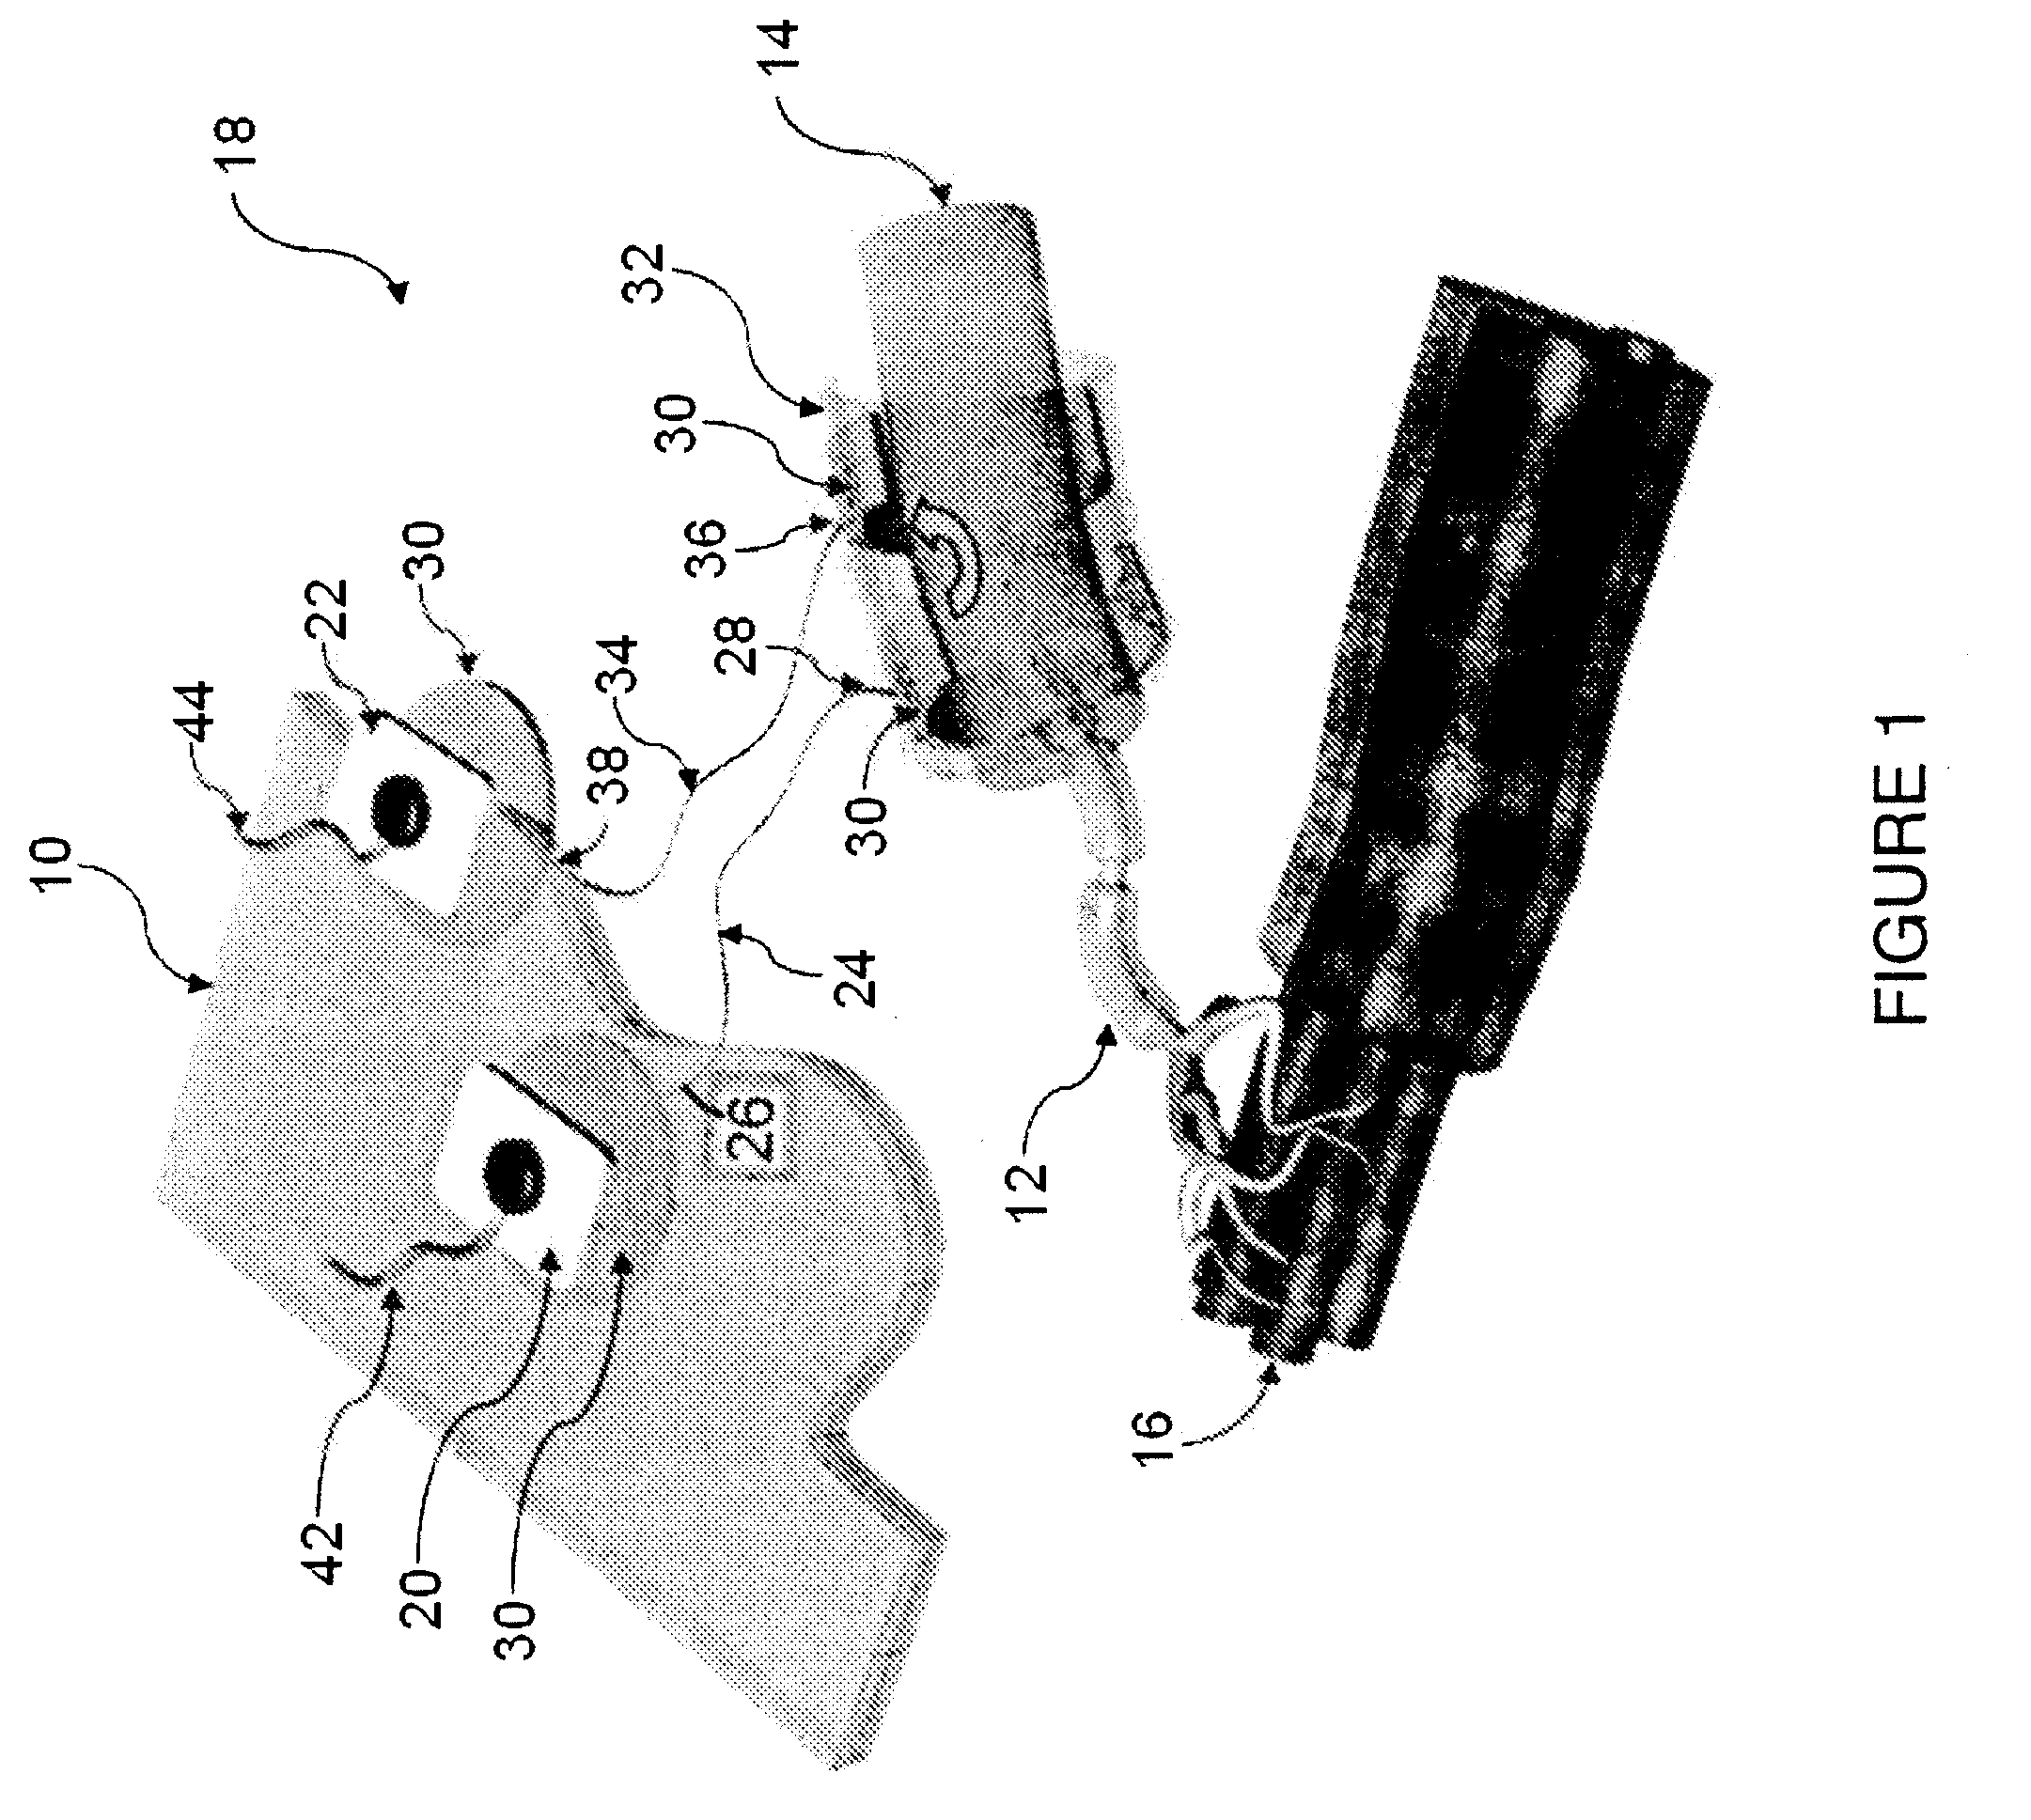 Method of routing electrical current to bodily tissues via implanted passive conductors